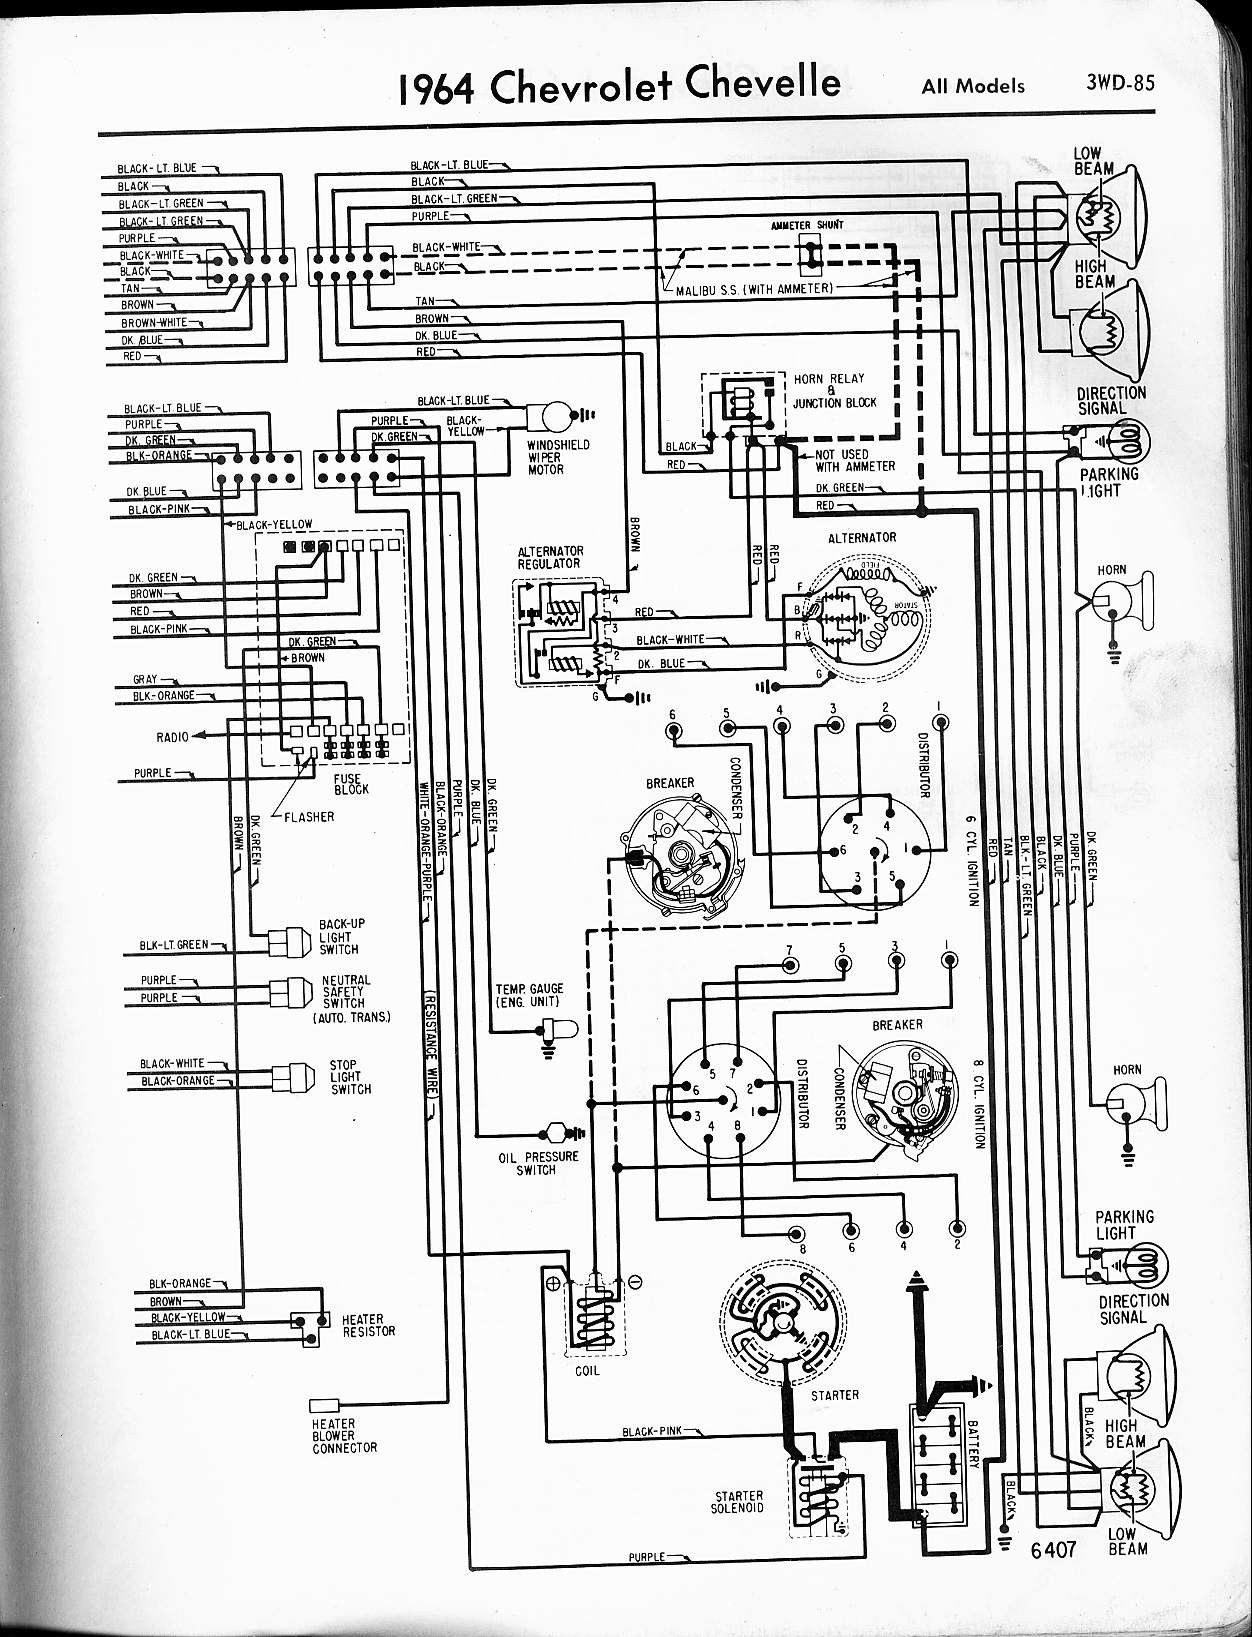 8bc2dc0 Ford Truck Off Road Light Wiring Diagrams Manual Book And Wiring Schematic